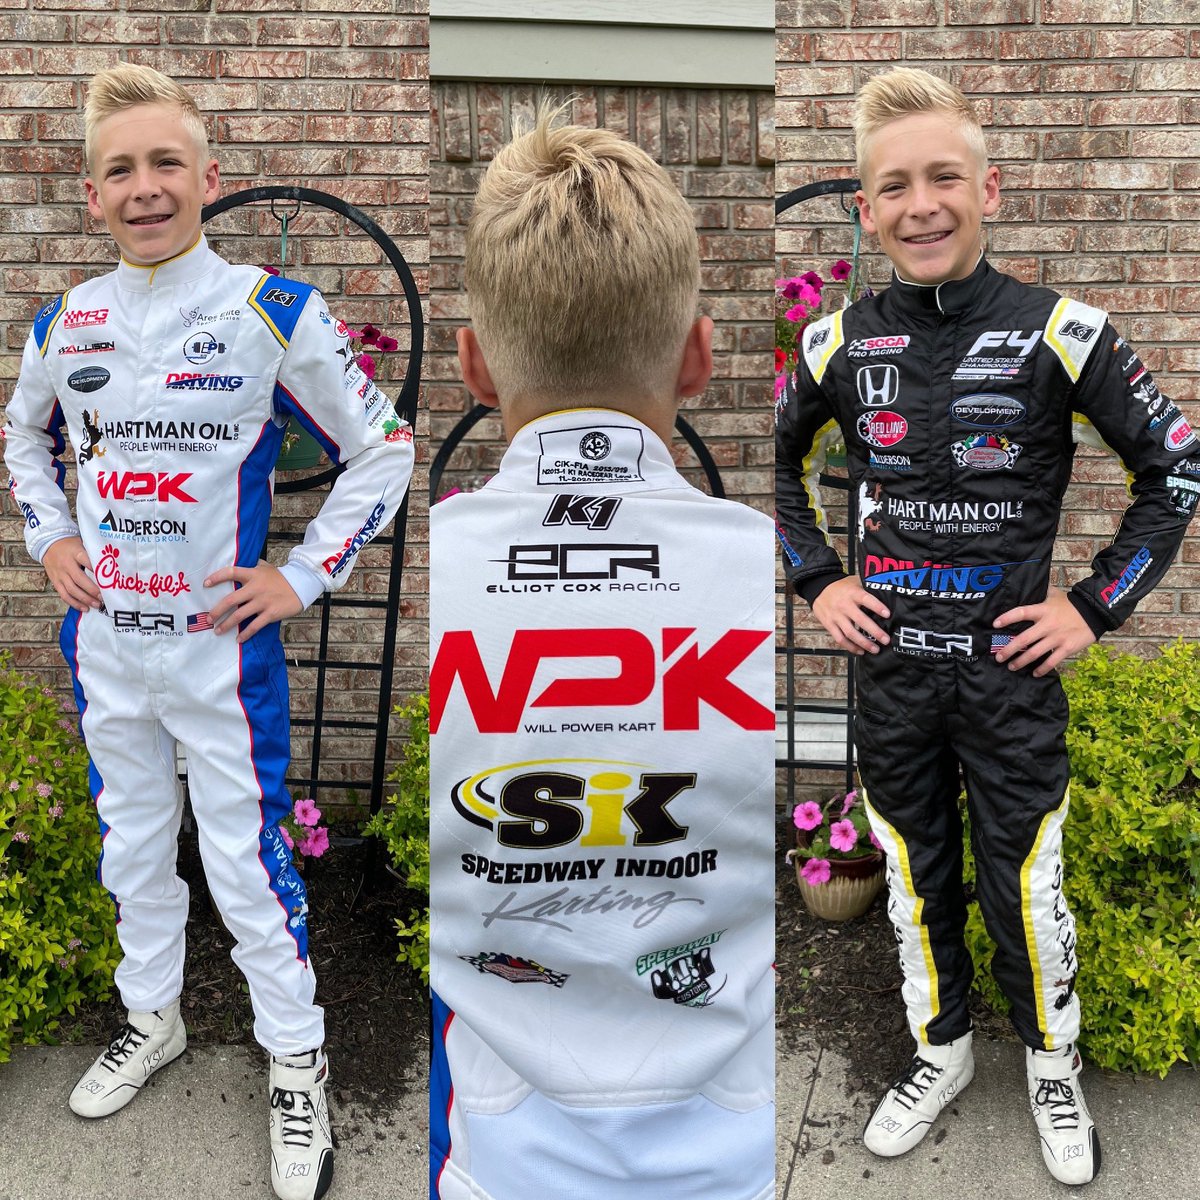 It’s a great day! The new @K1RaceGear Karting and F4 suits have arrived. Thank you for making them look amazing! Which one is your favorite?